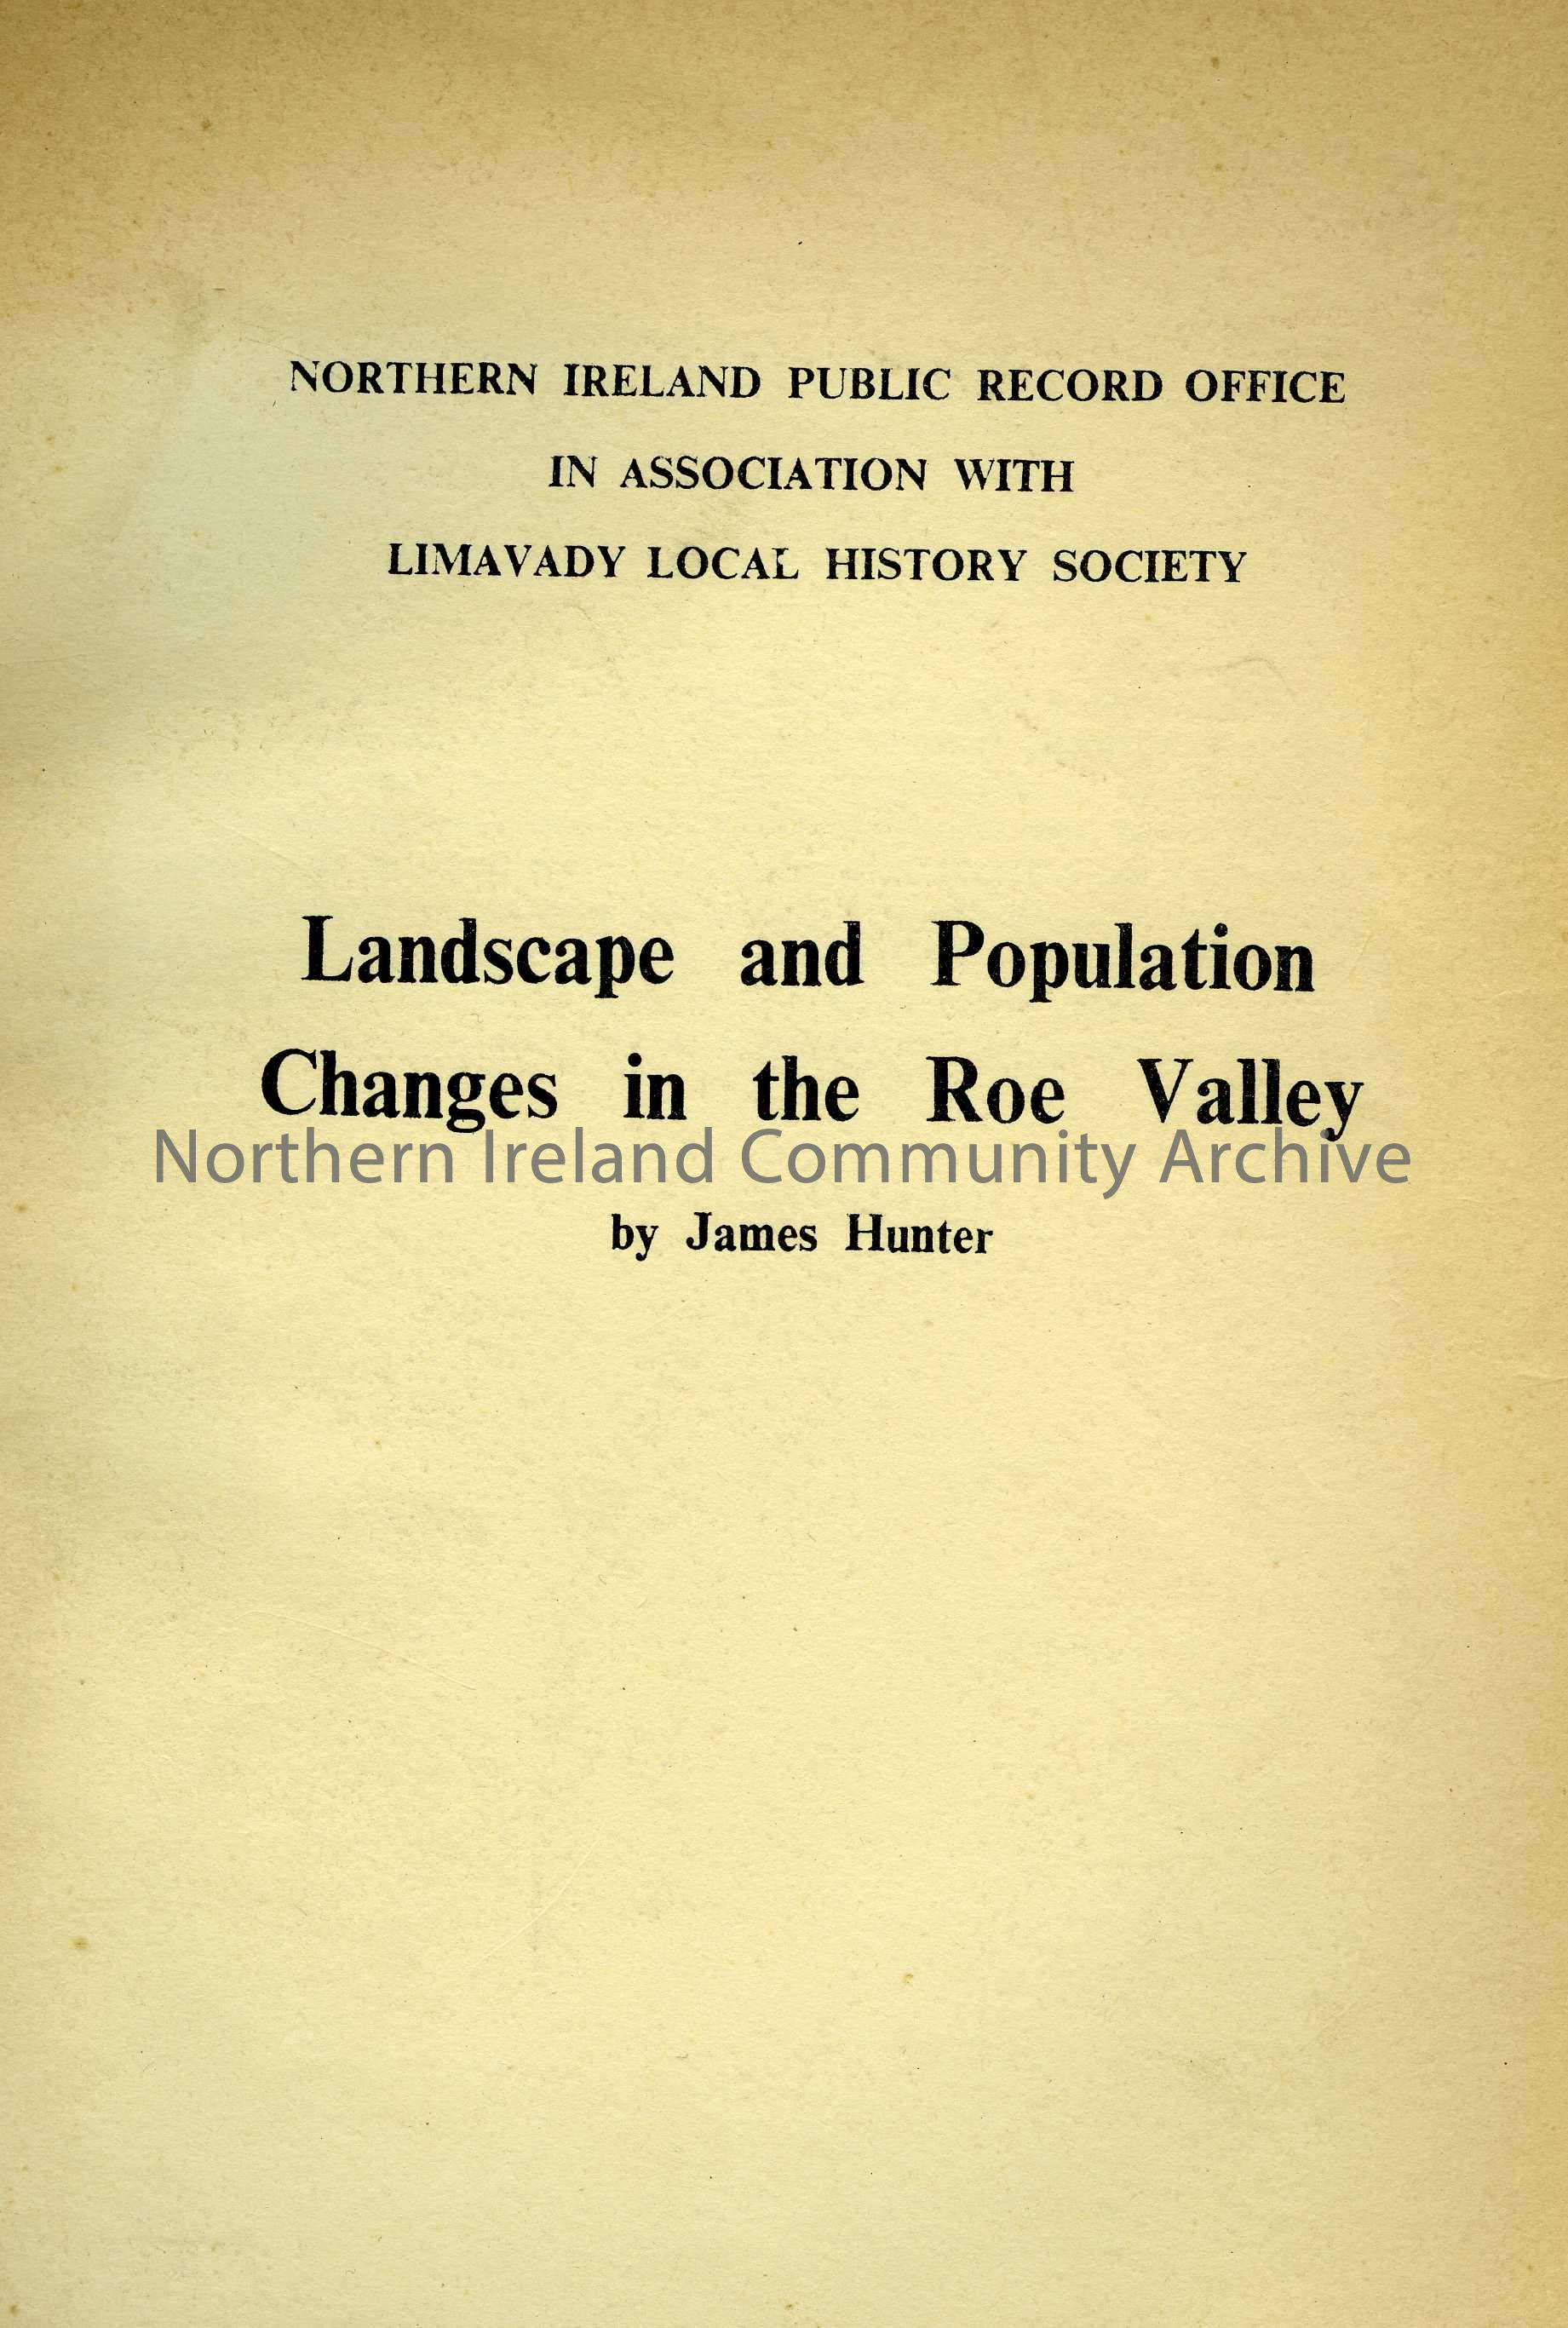 book titled, Landscape and Population in the Roe Valley. By James Hunter. (5116)